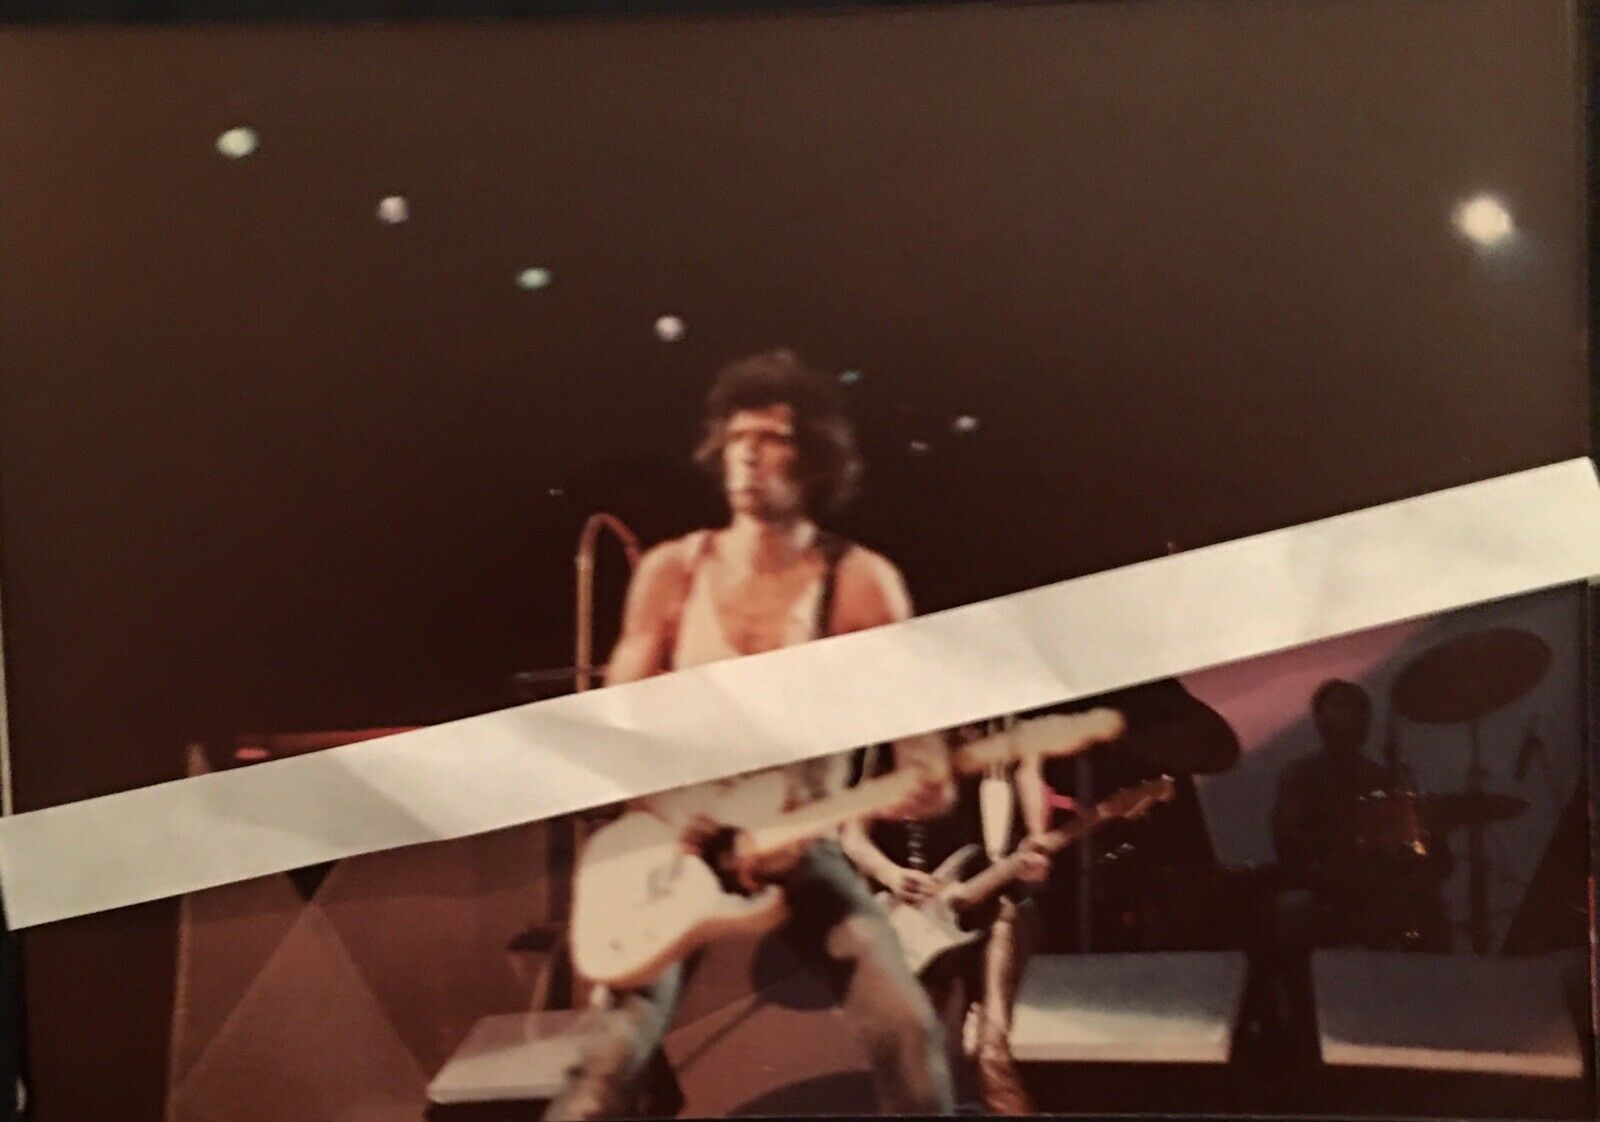 5 X 7 Photos Never Seen The Rolling Stones  There’s A Piece Of Paper Cover And￼